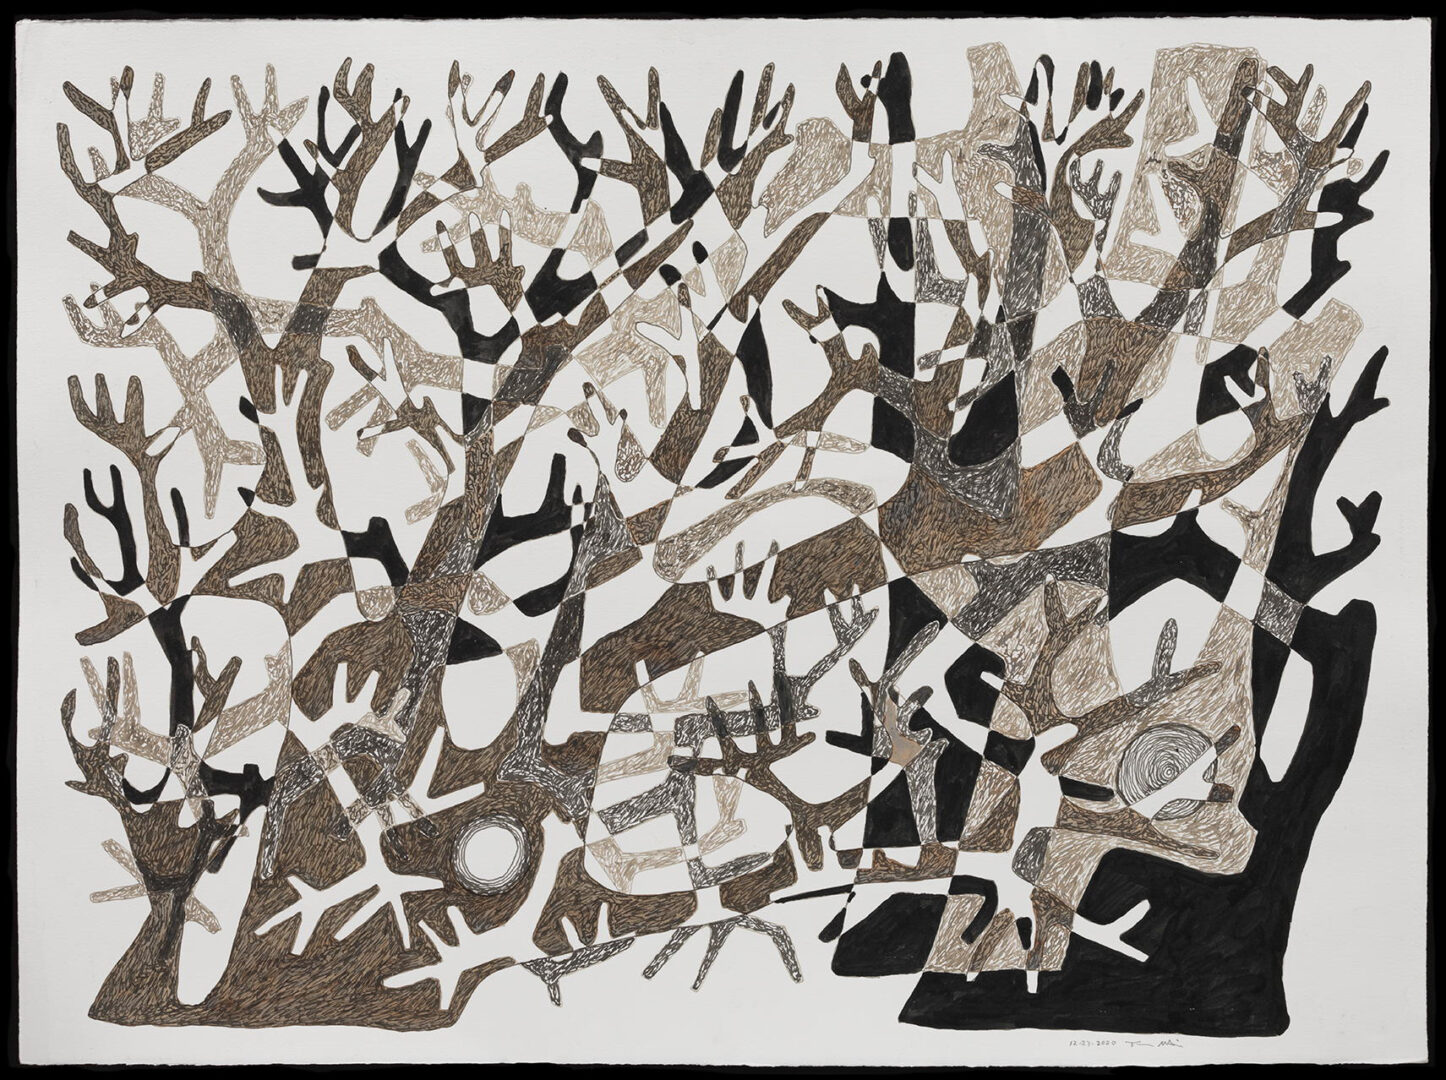 A painting of trees with branches and leaves.